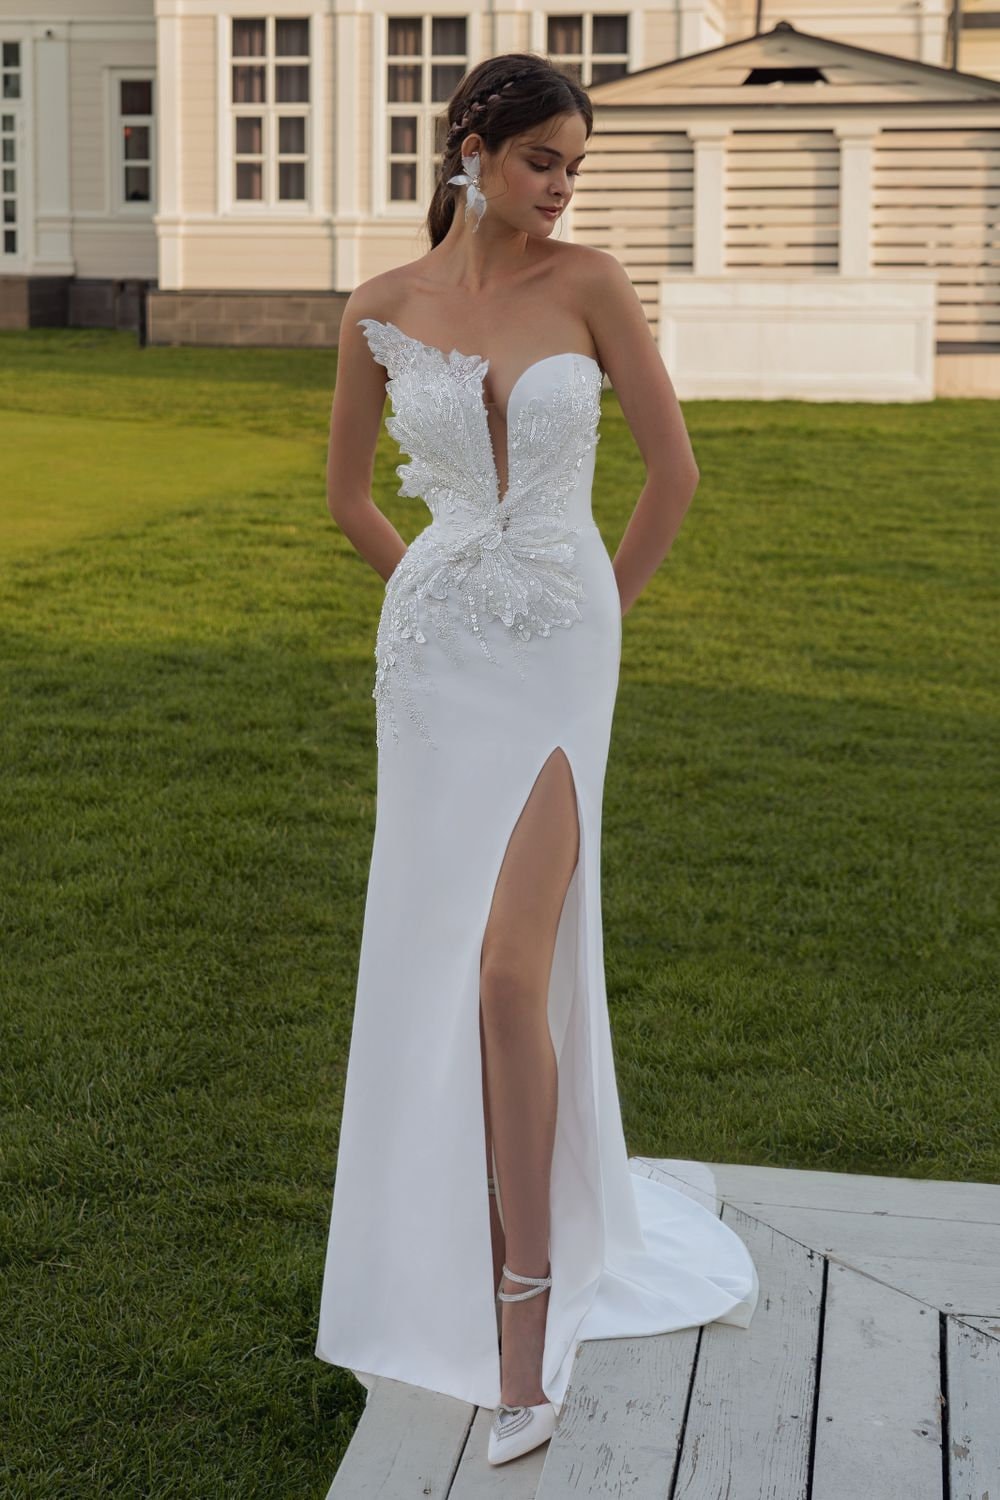 Original Beautiful Fitted Sheath Wedding Dress Bridal Gown Sleeveless Strapless Plunge Sweetheart Neckline Side Slit Crepe Fabric Open Back